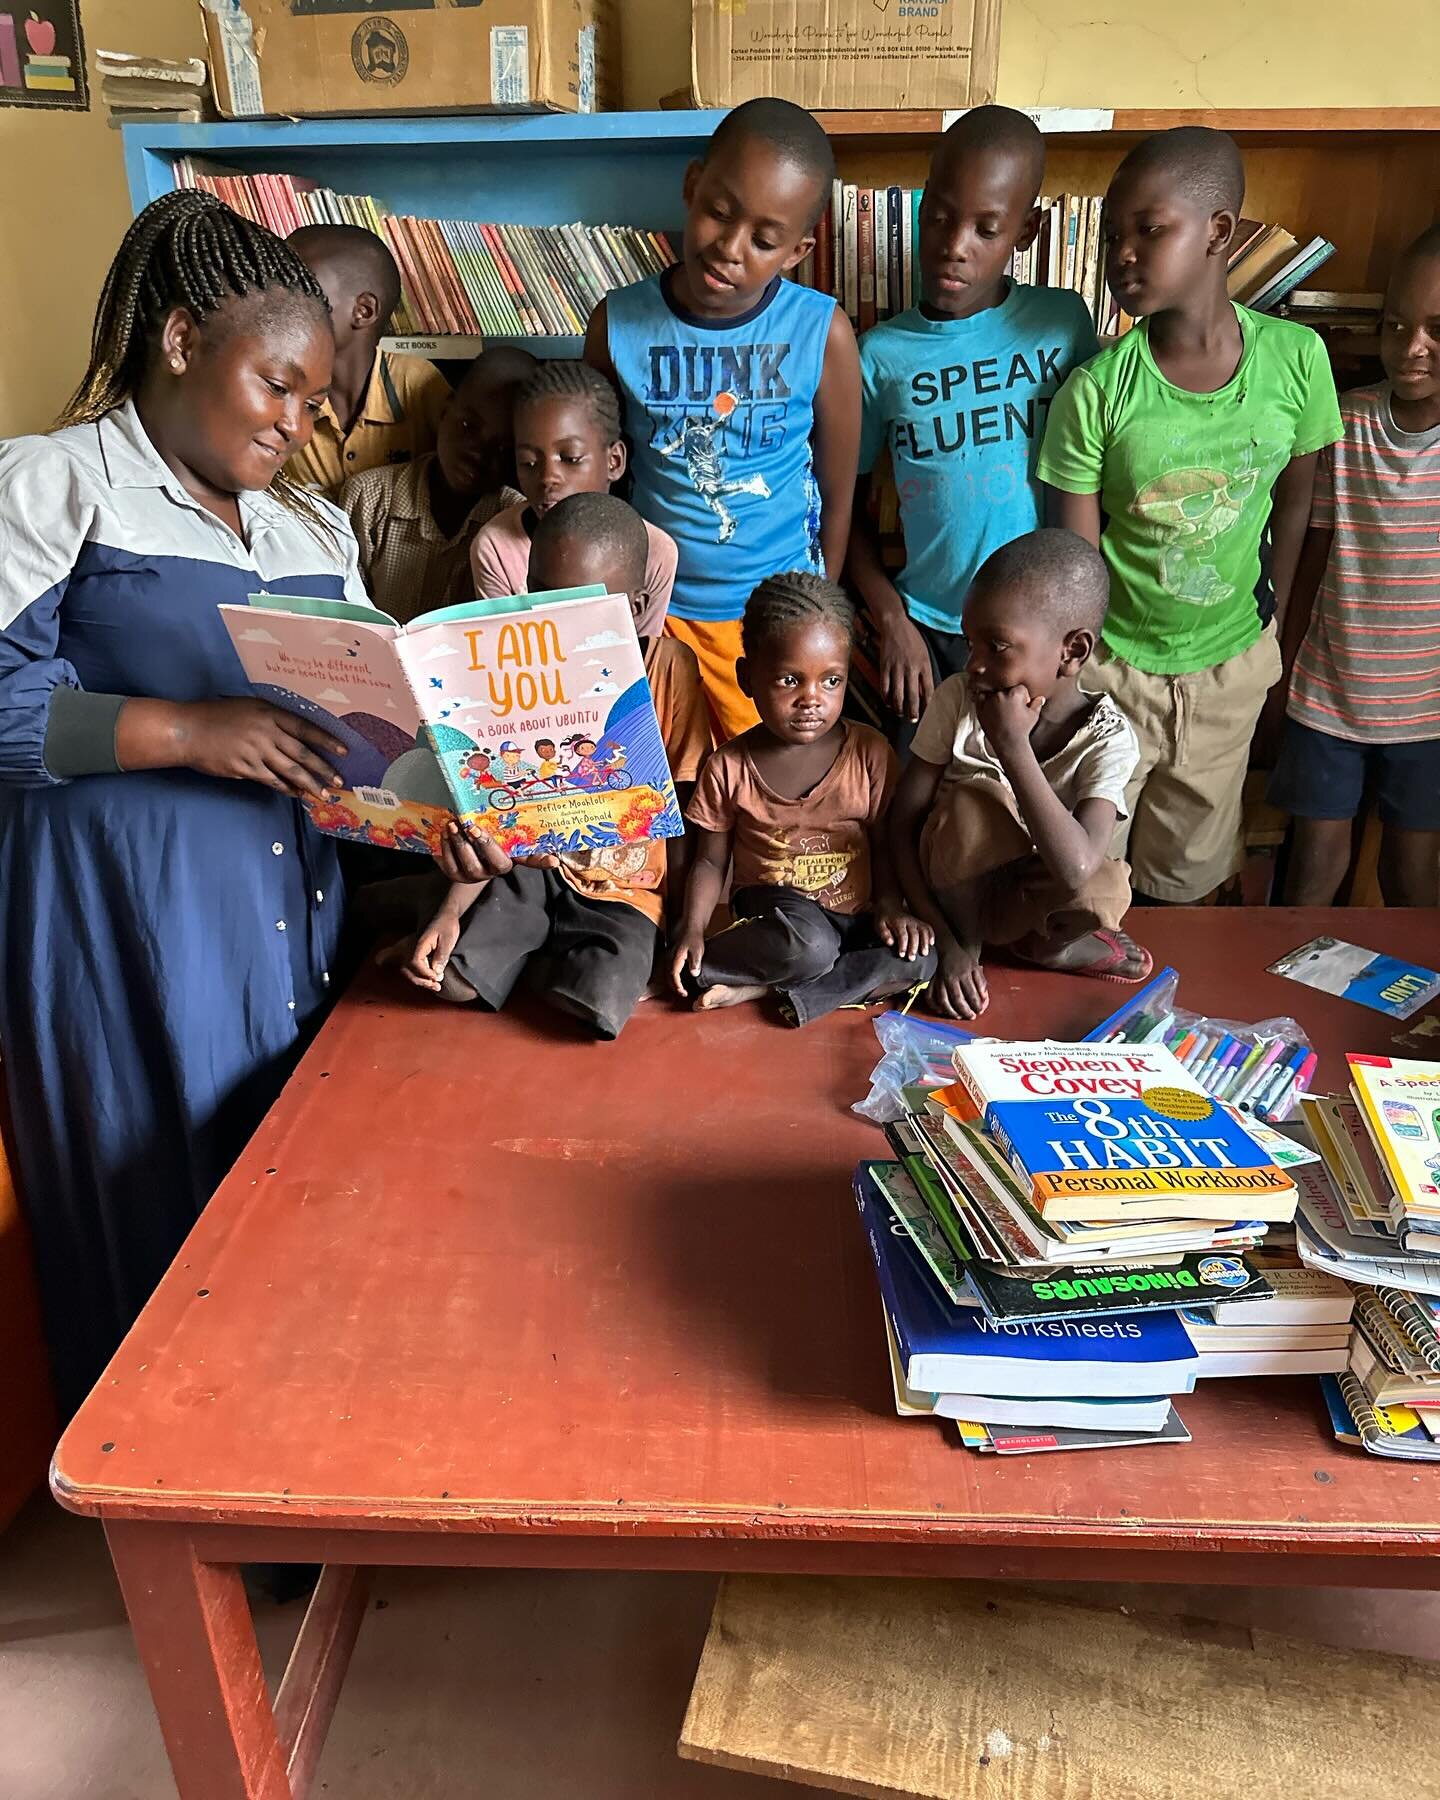 It&rsquo;s time for another book drive! We have a team going in June and we are bringing more books to help fill up the local Taru Community Library. 

Our amazing team member on the ground in Kenya, Mwanaisha, has put together a much needed book wis